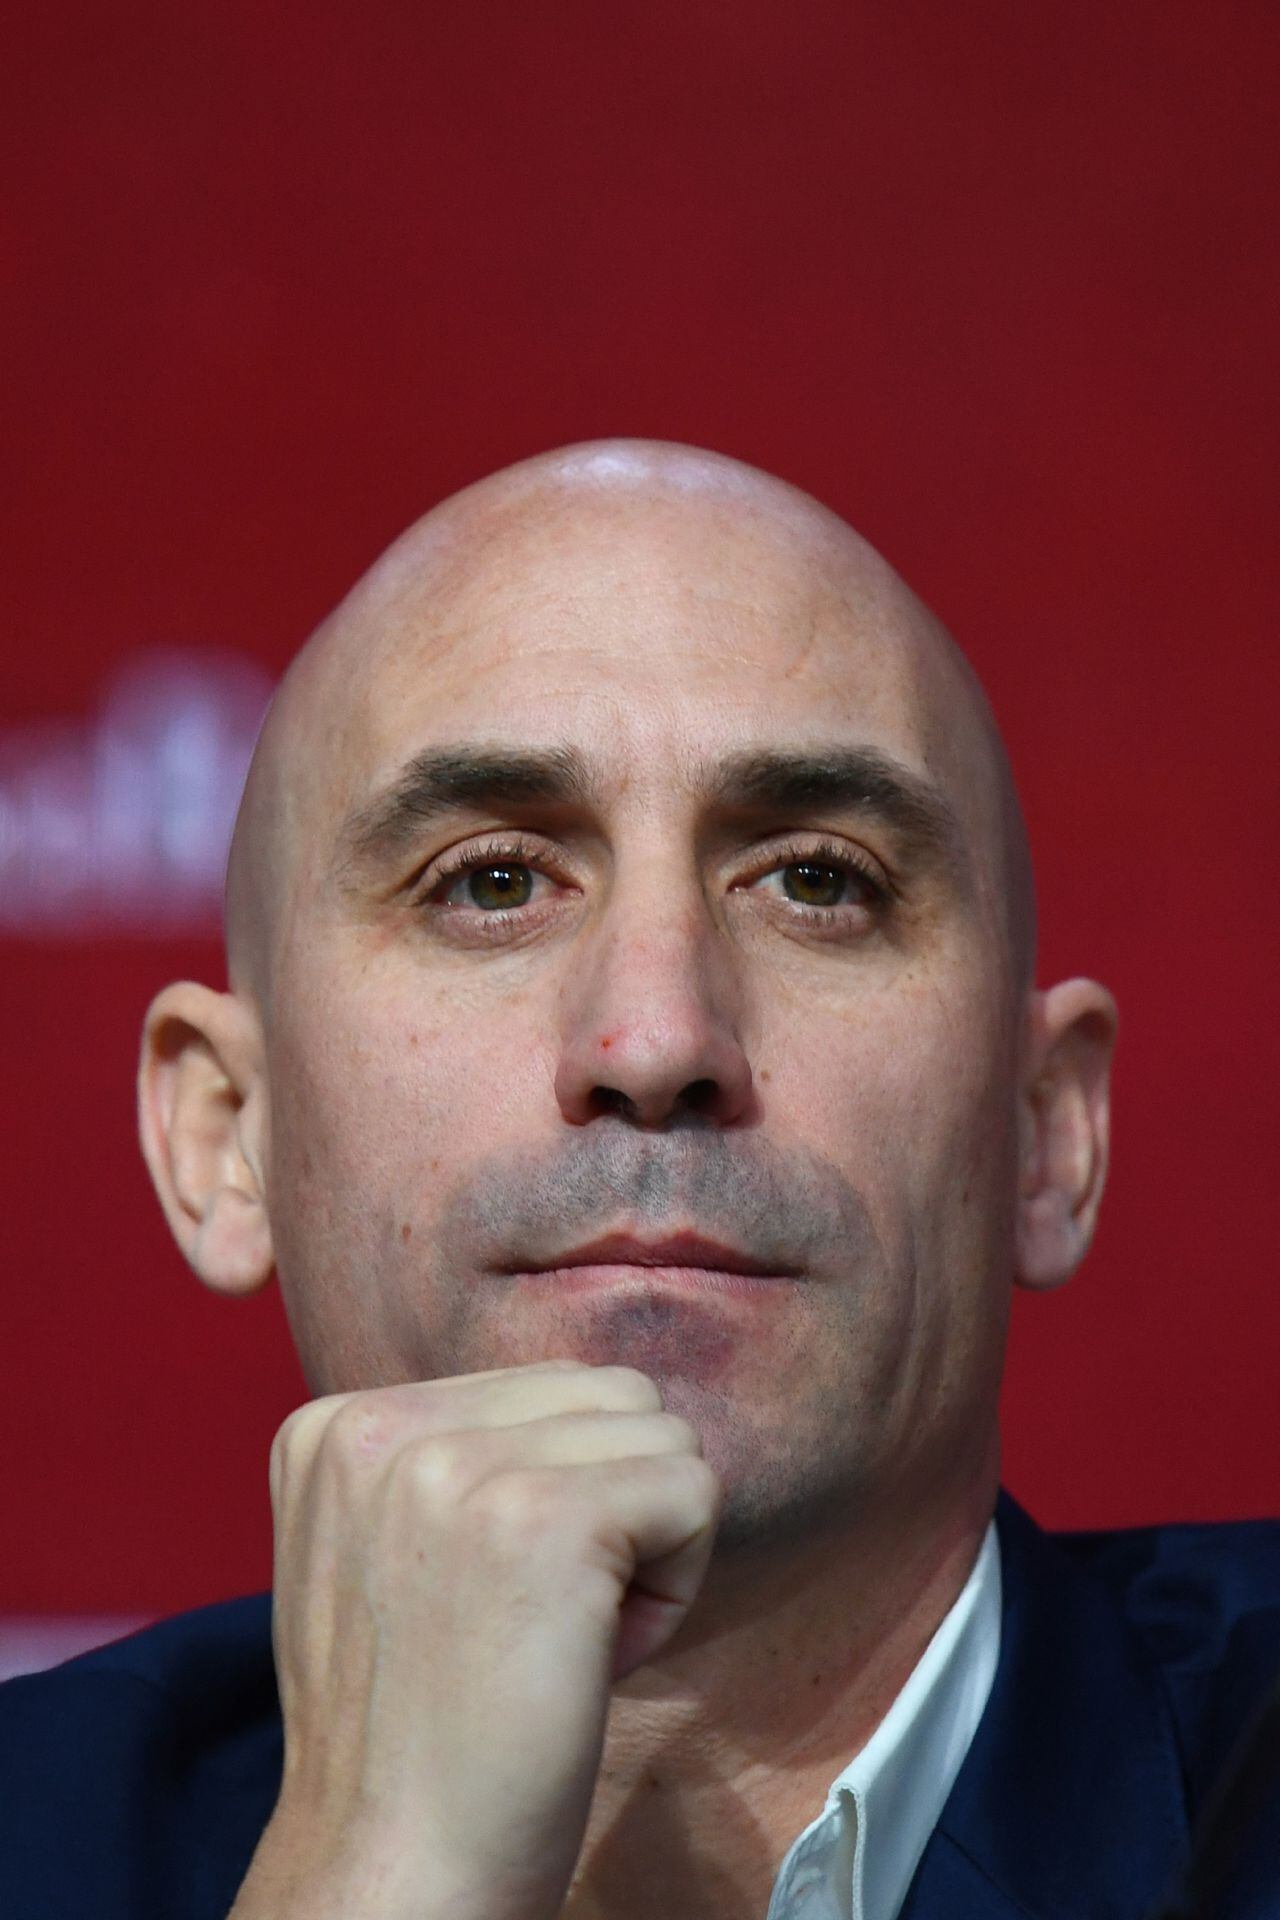 (FILES) Spanish Royal Football Federation (RFEF) president Luis Rubiales attends a press conference on November 27, 2019 in Madrid during the official presentation of Spain's coach. Spain midfielder Jenni Hermoso defended Spanish football federation president Luis Rubiales after he came under fire for kissing her on the lips following the team's Women's World Cup victory on August 20, 2023. (Photo by GABRIEL BOUYS / AFP)